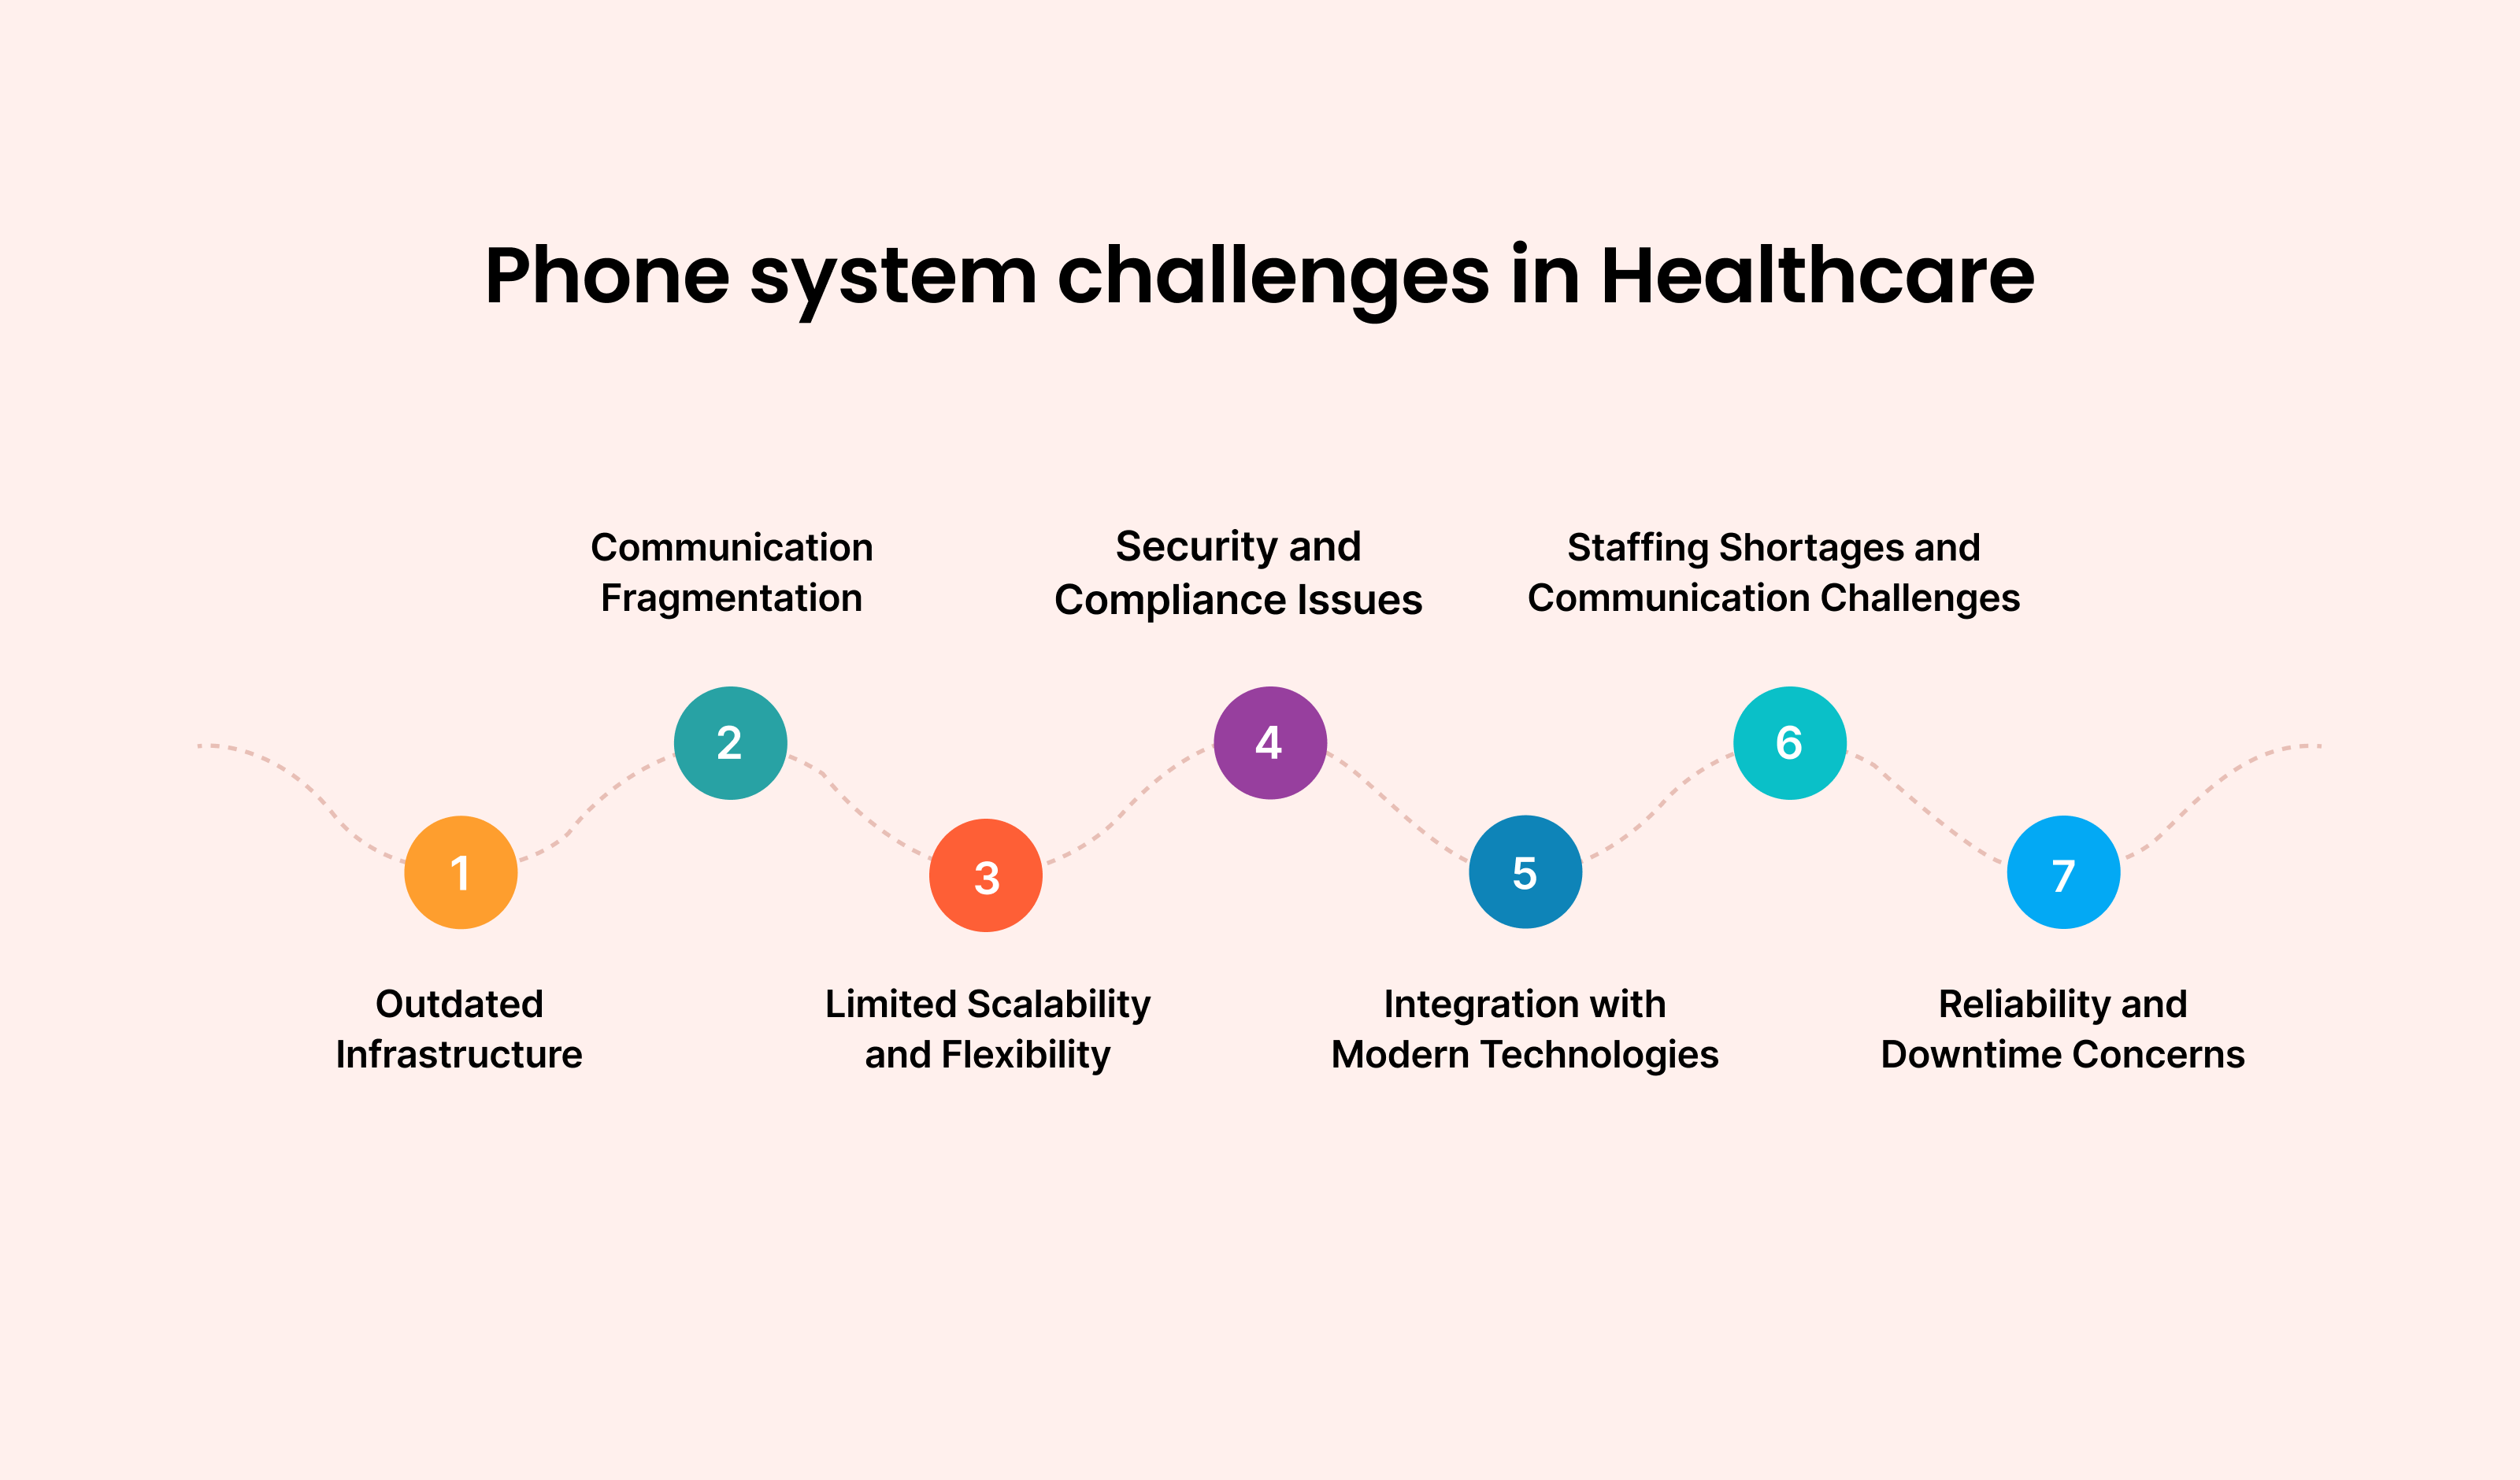 Phone System Challenges in Healthcare: